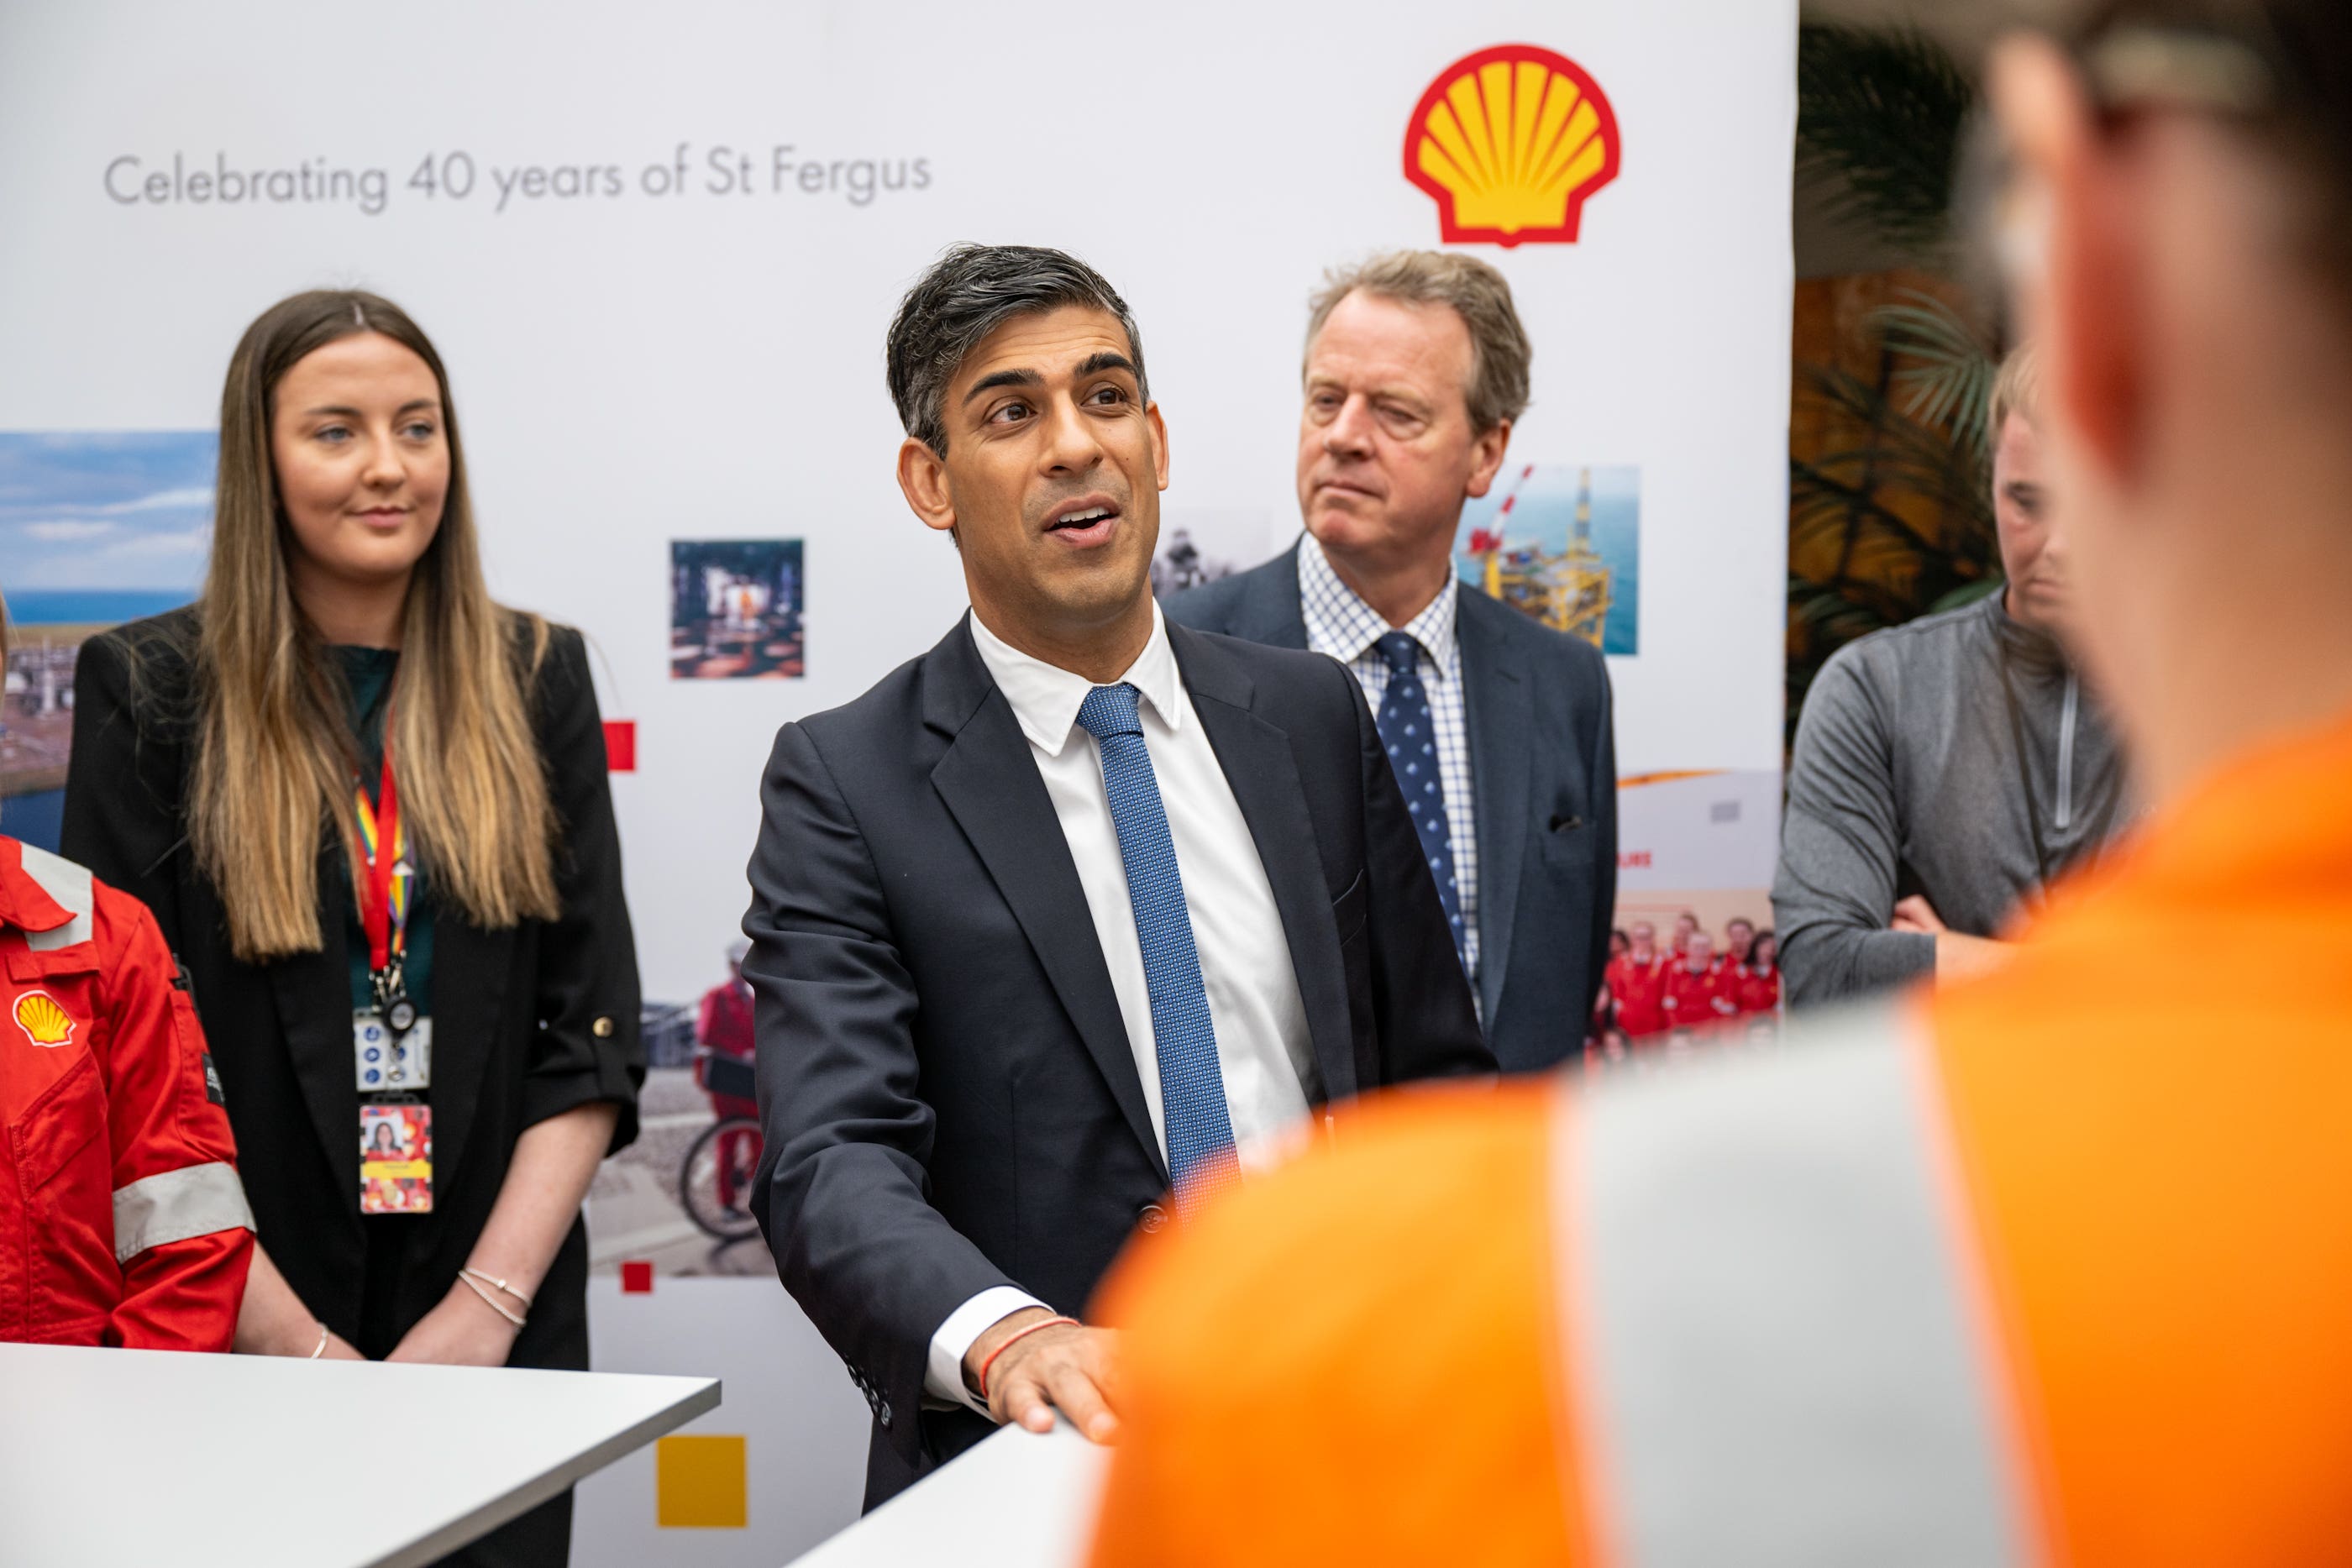 Prime minister Rishi Sunak during his visit to the Shell St Fergus gas plant in Peterhead, Aberdeenshire